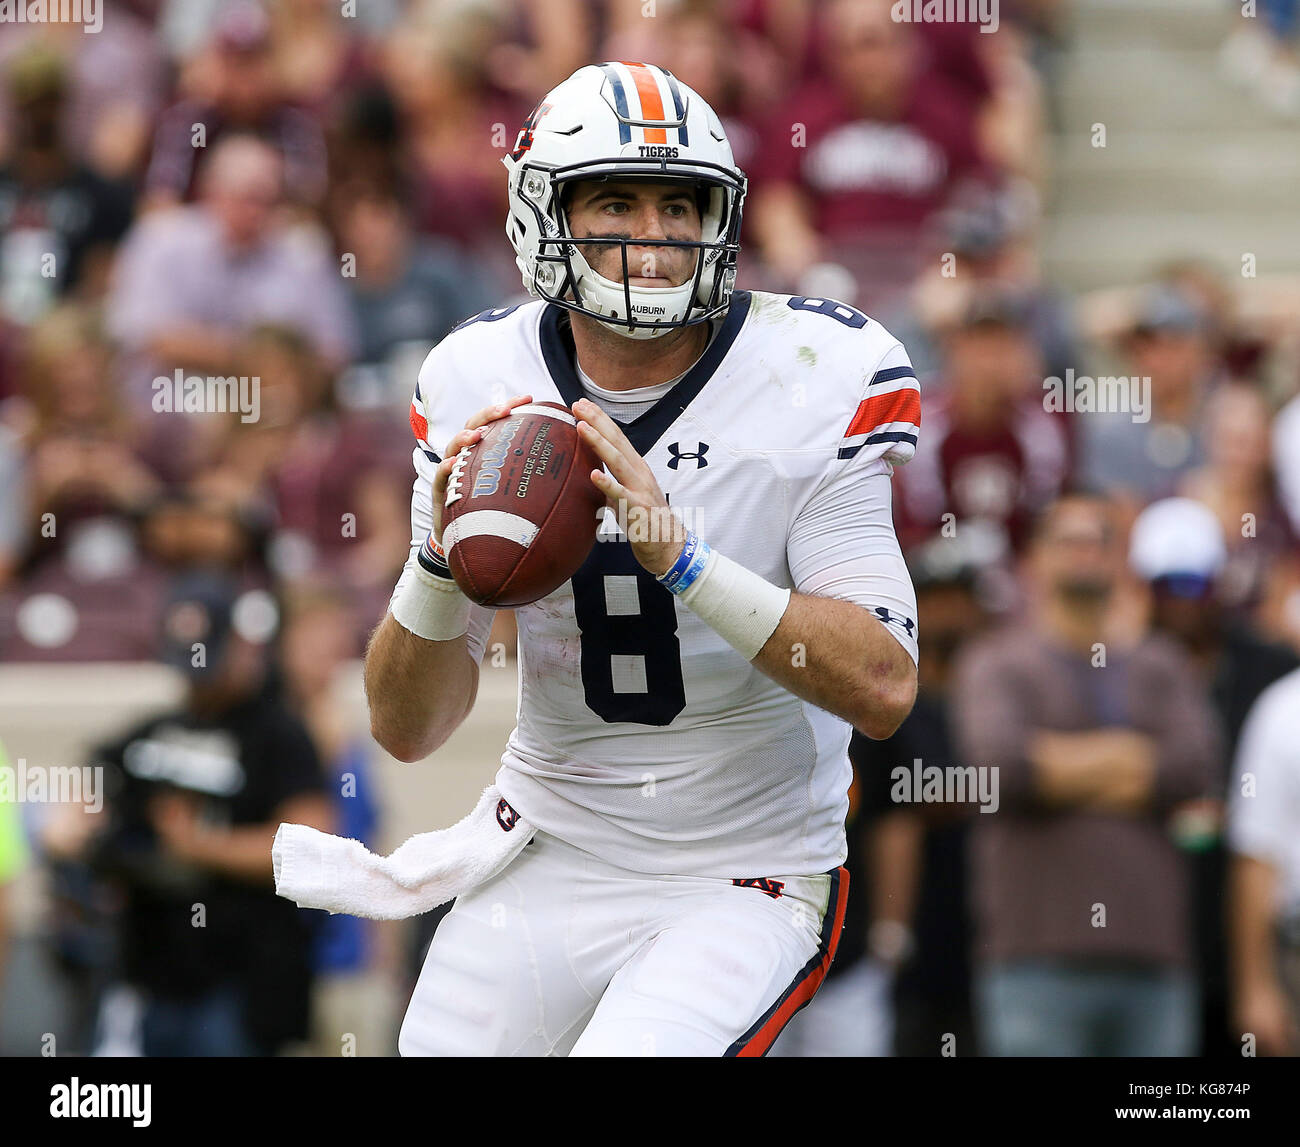 November 4, 2017: Auburn Tigers quarterback Jarrett Stidham (8) drops back to pass in the second quarter during the NCAA football game between the Auburn Tigers and the Texas A&M Aggies at Kyle Field in College Station, TX; John Glaser/CSM. Stock Photo